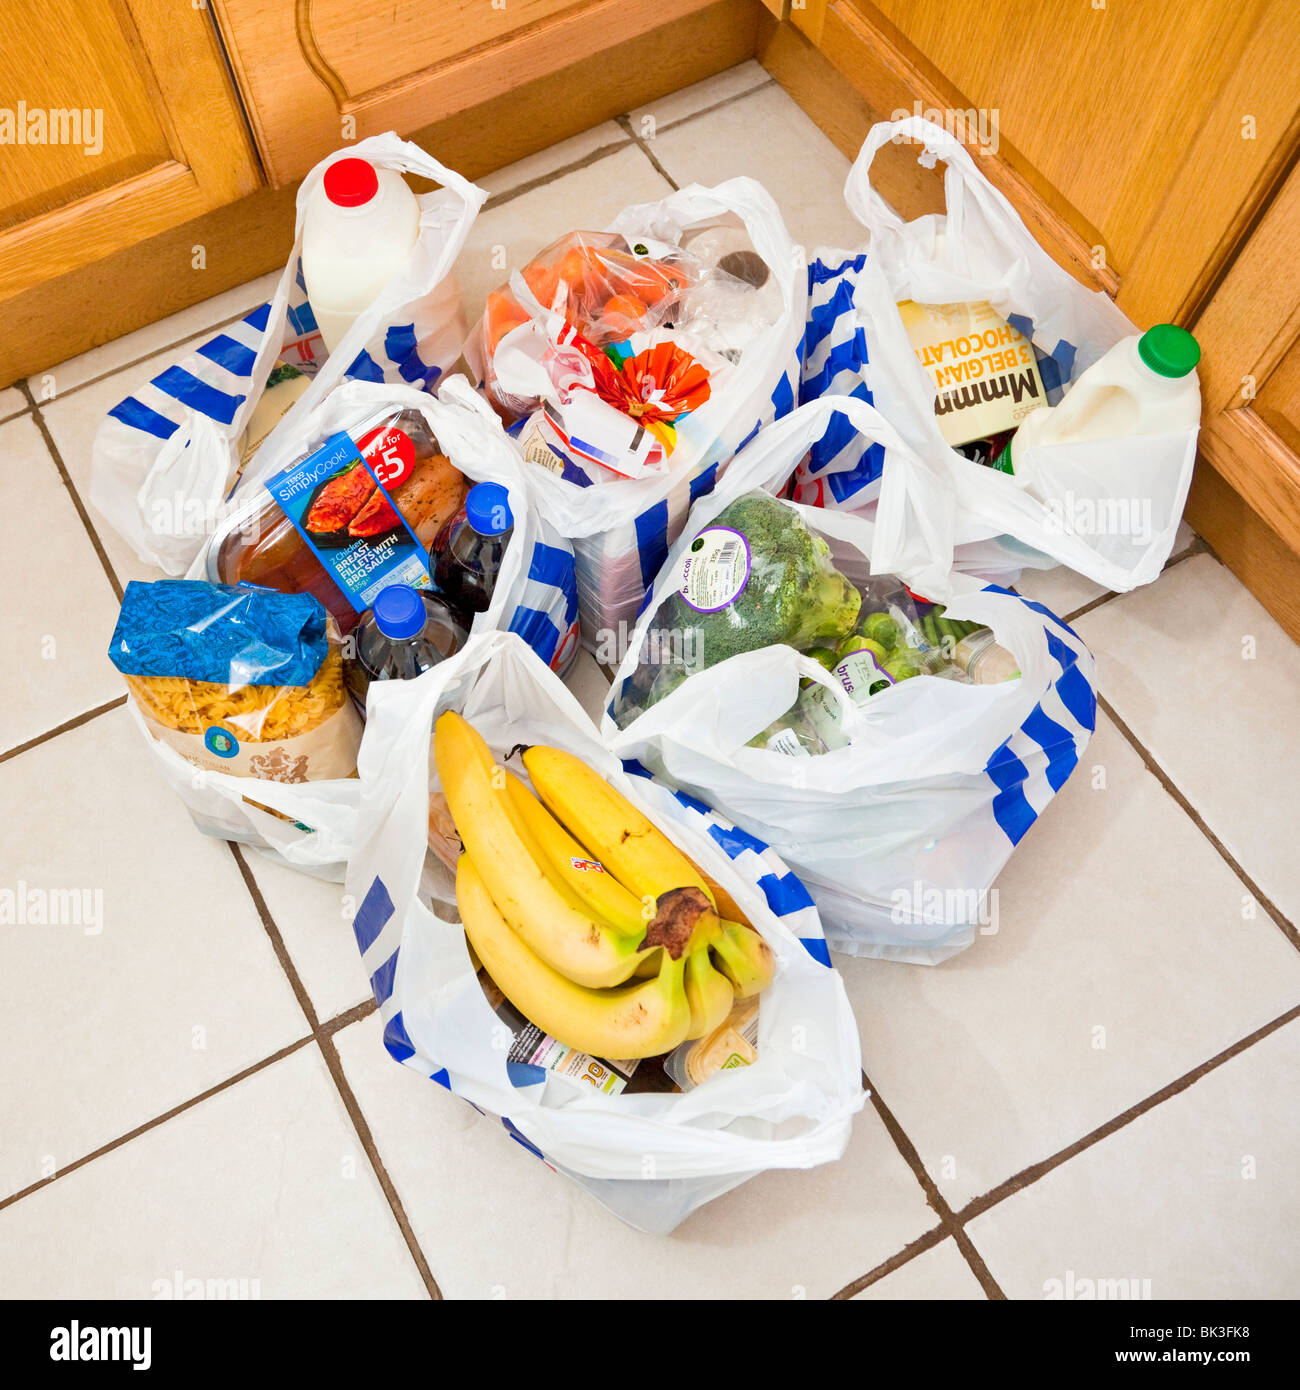 Grocery bags, carrier bags, shopping bags on a kitchen floor, England, UK Stock Photo